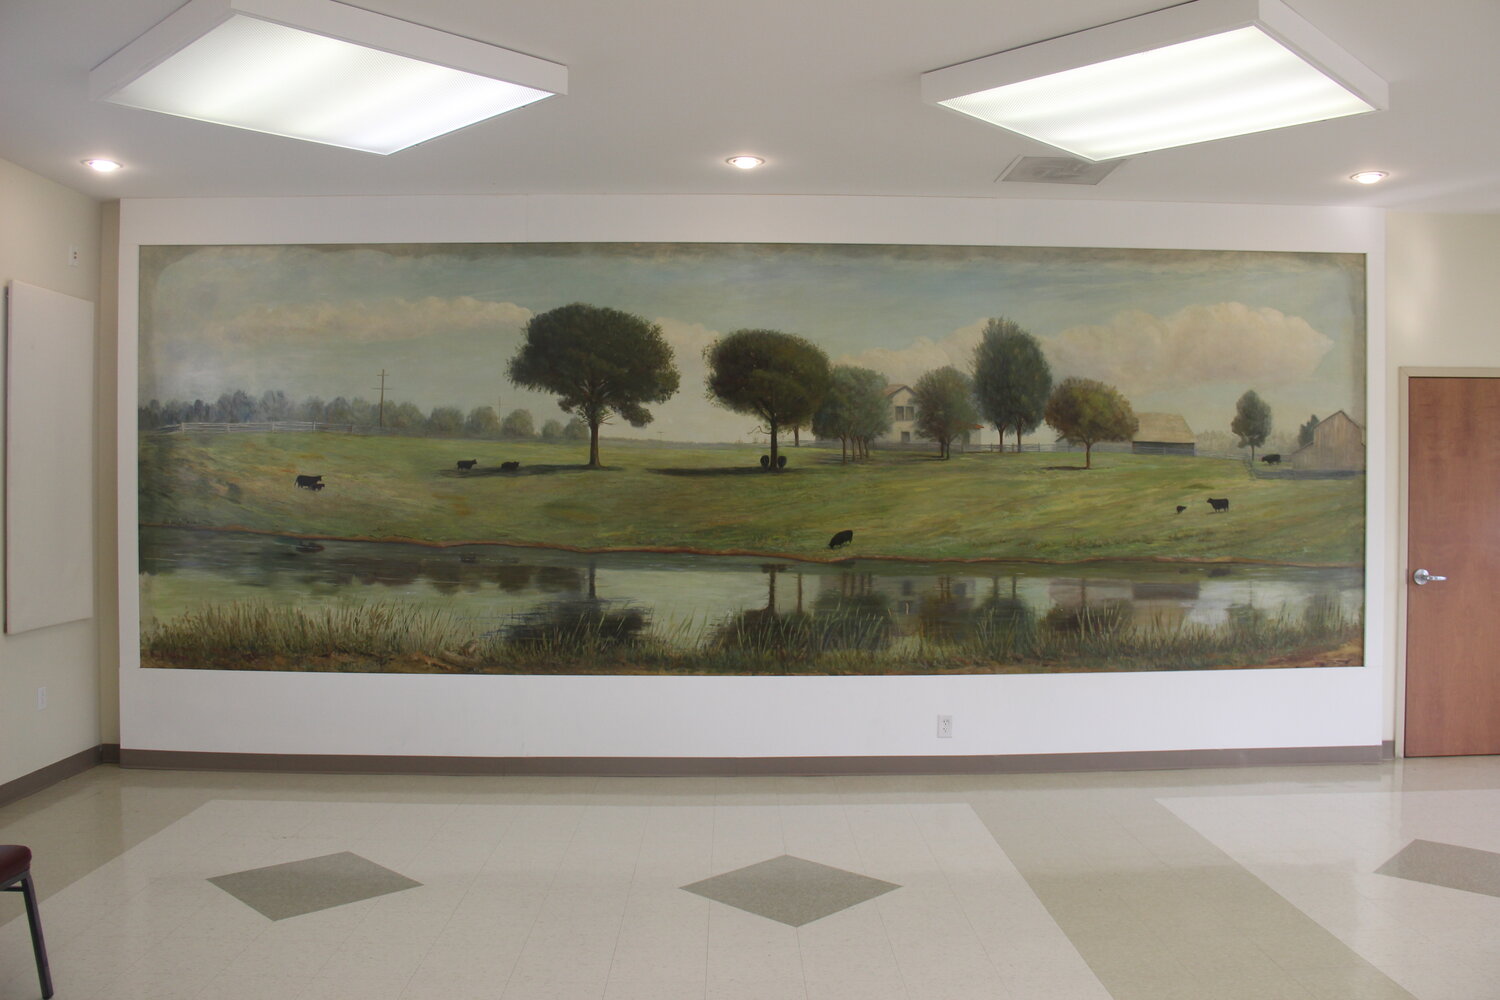 HISTORICAL MURAL — The large mural housed at the Heiliger Building in Diekroeger Park, painted in 1963 by Estelle Creighton, depicts a scenic view of the Chaney family farm in Wright City. The mural was the focal point of the dining room in Big Boy’s Restaurant, the town’s most famous business.